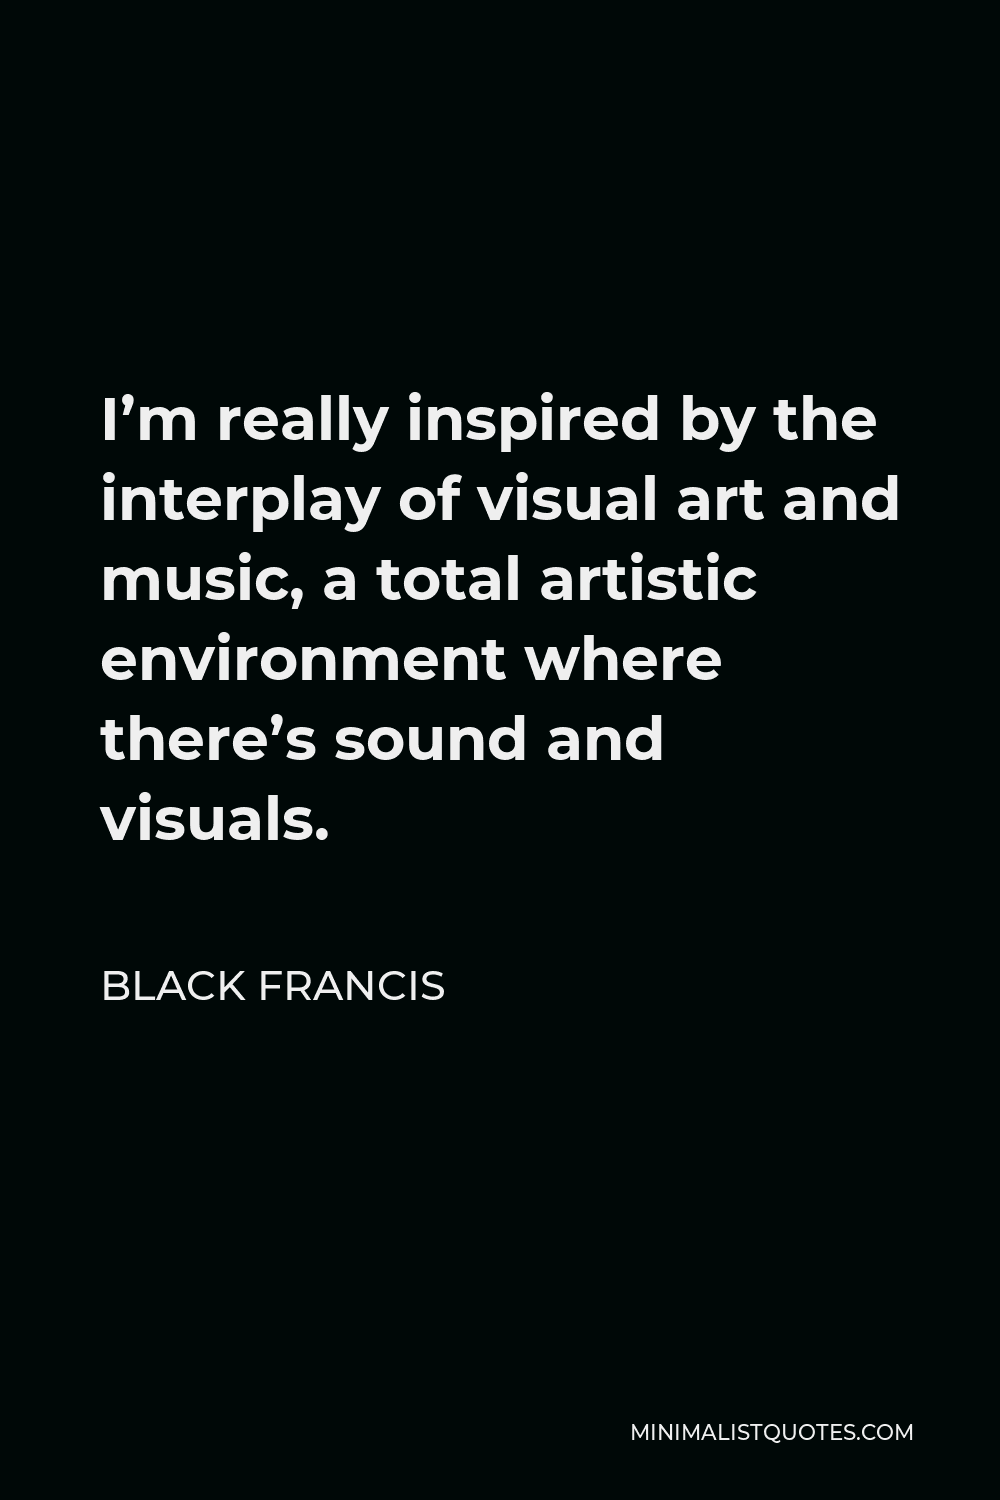 Black Francis Quote - I’m really inspired by the interplay of visual art and music, a total artistic environment where there’s sound and visuals.